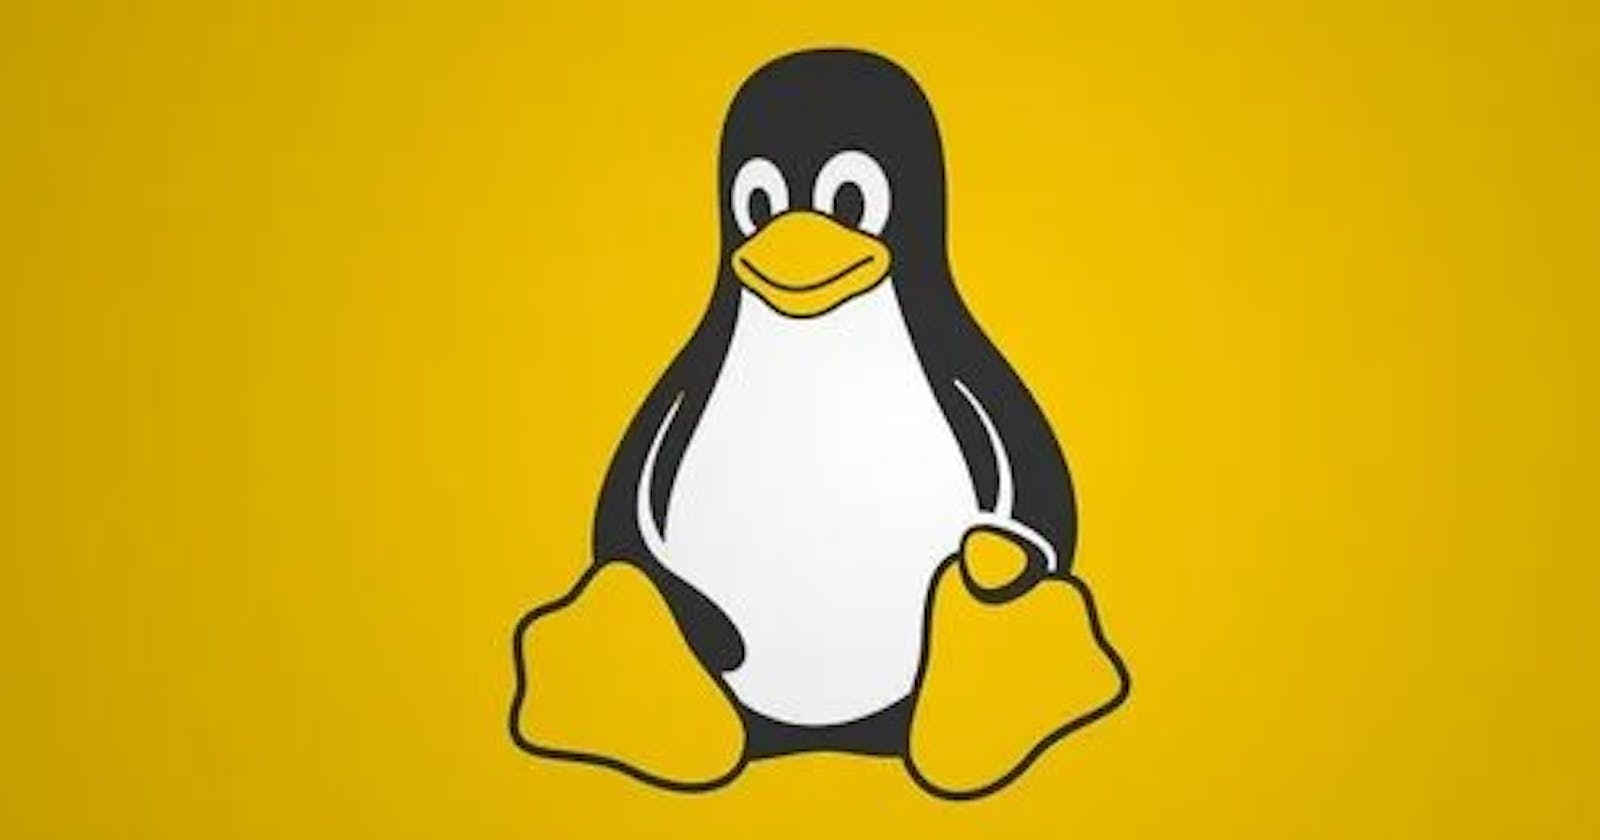 Basic Commands For Linux